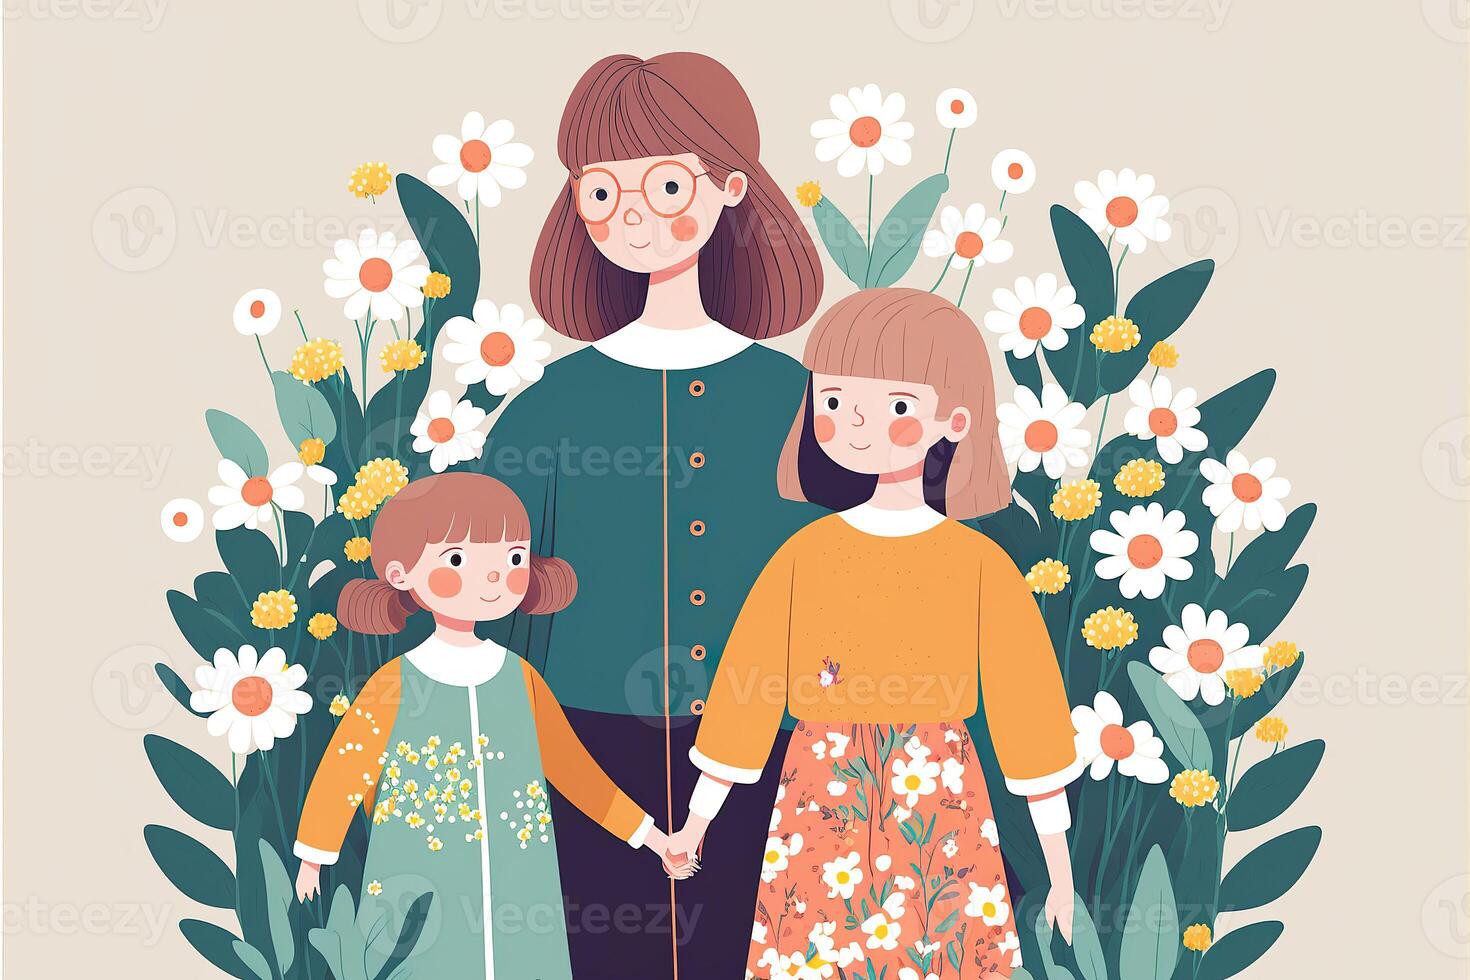 Illustration of Fashionable Young Woman Standing with Her Daughters, Floral Decorated on Beige Background. Concept of Mothers Day, Relationship Between Mother and Child. . photo